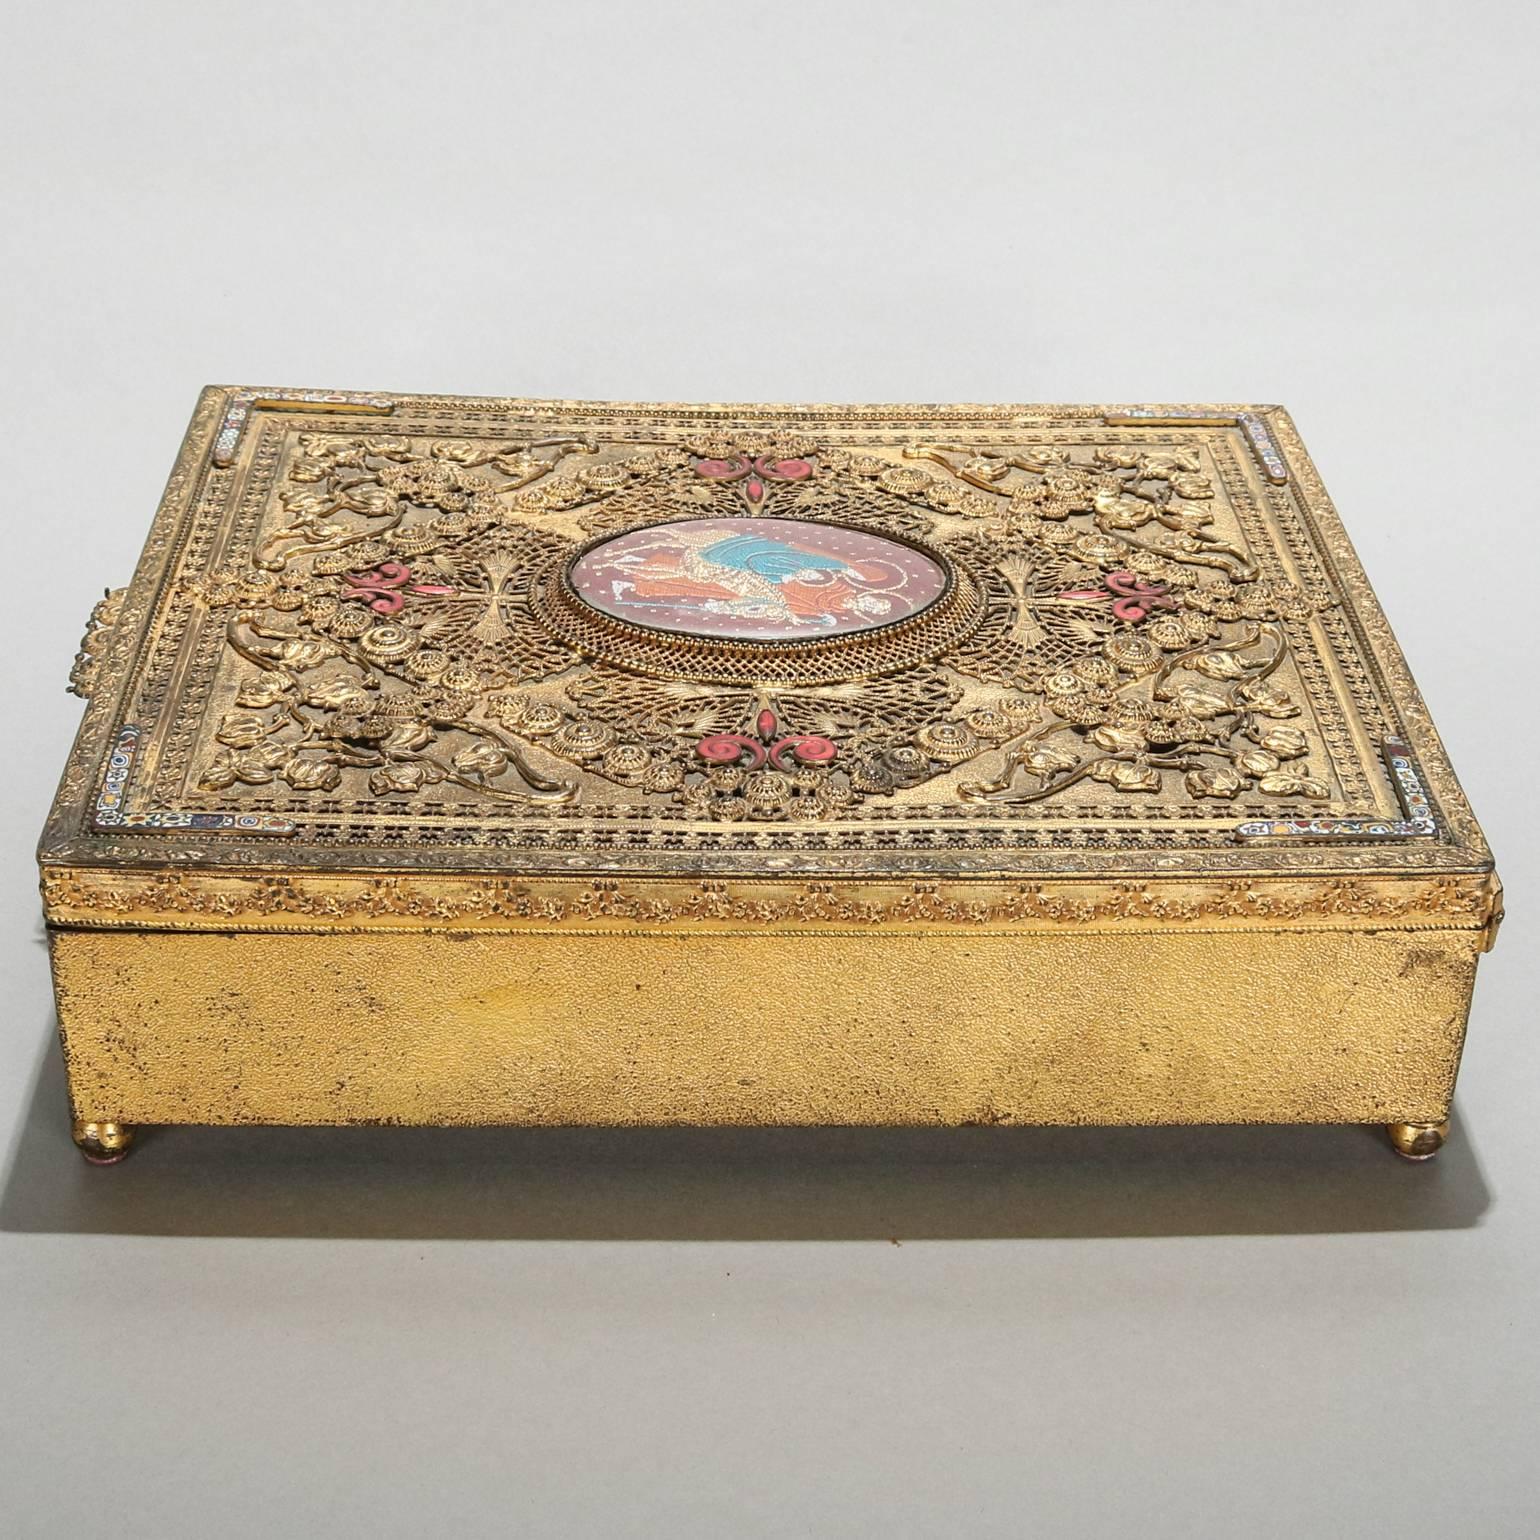 American Antique Gilt Metal Jeweled Bible Box with the Holy Family by E. & J.B. Empire